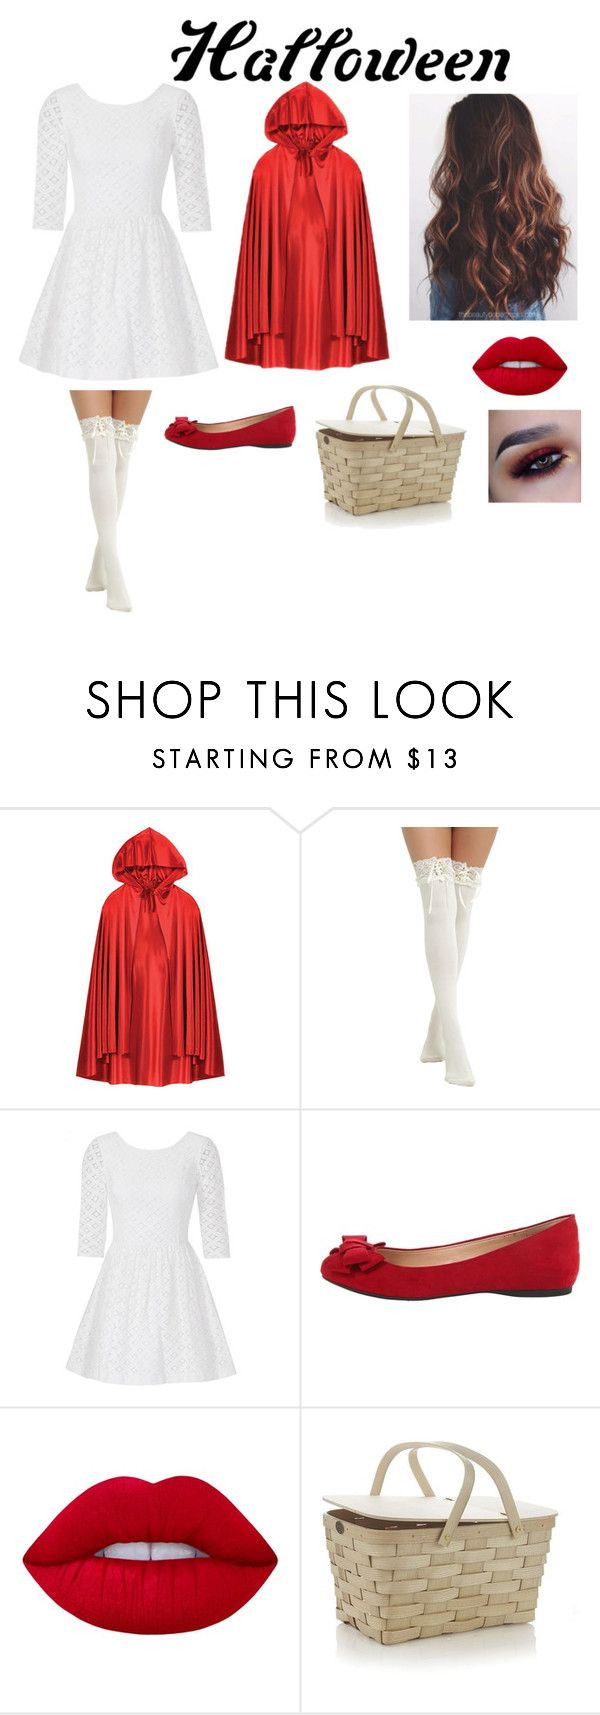 Little Red Riding Hood Costume DIY
 Best 25 Book character costumes ideas on Pinterest